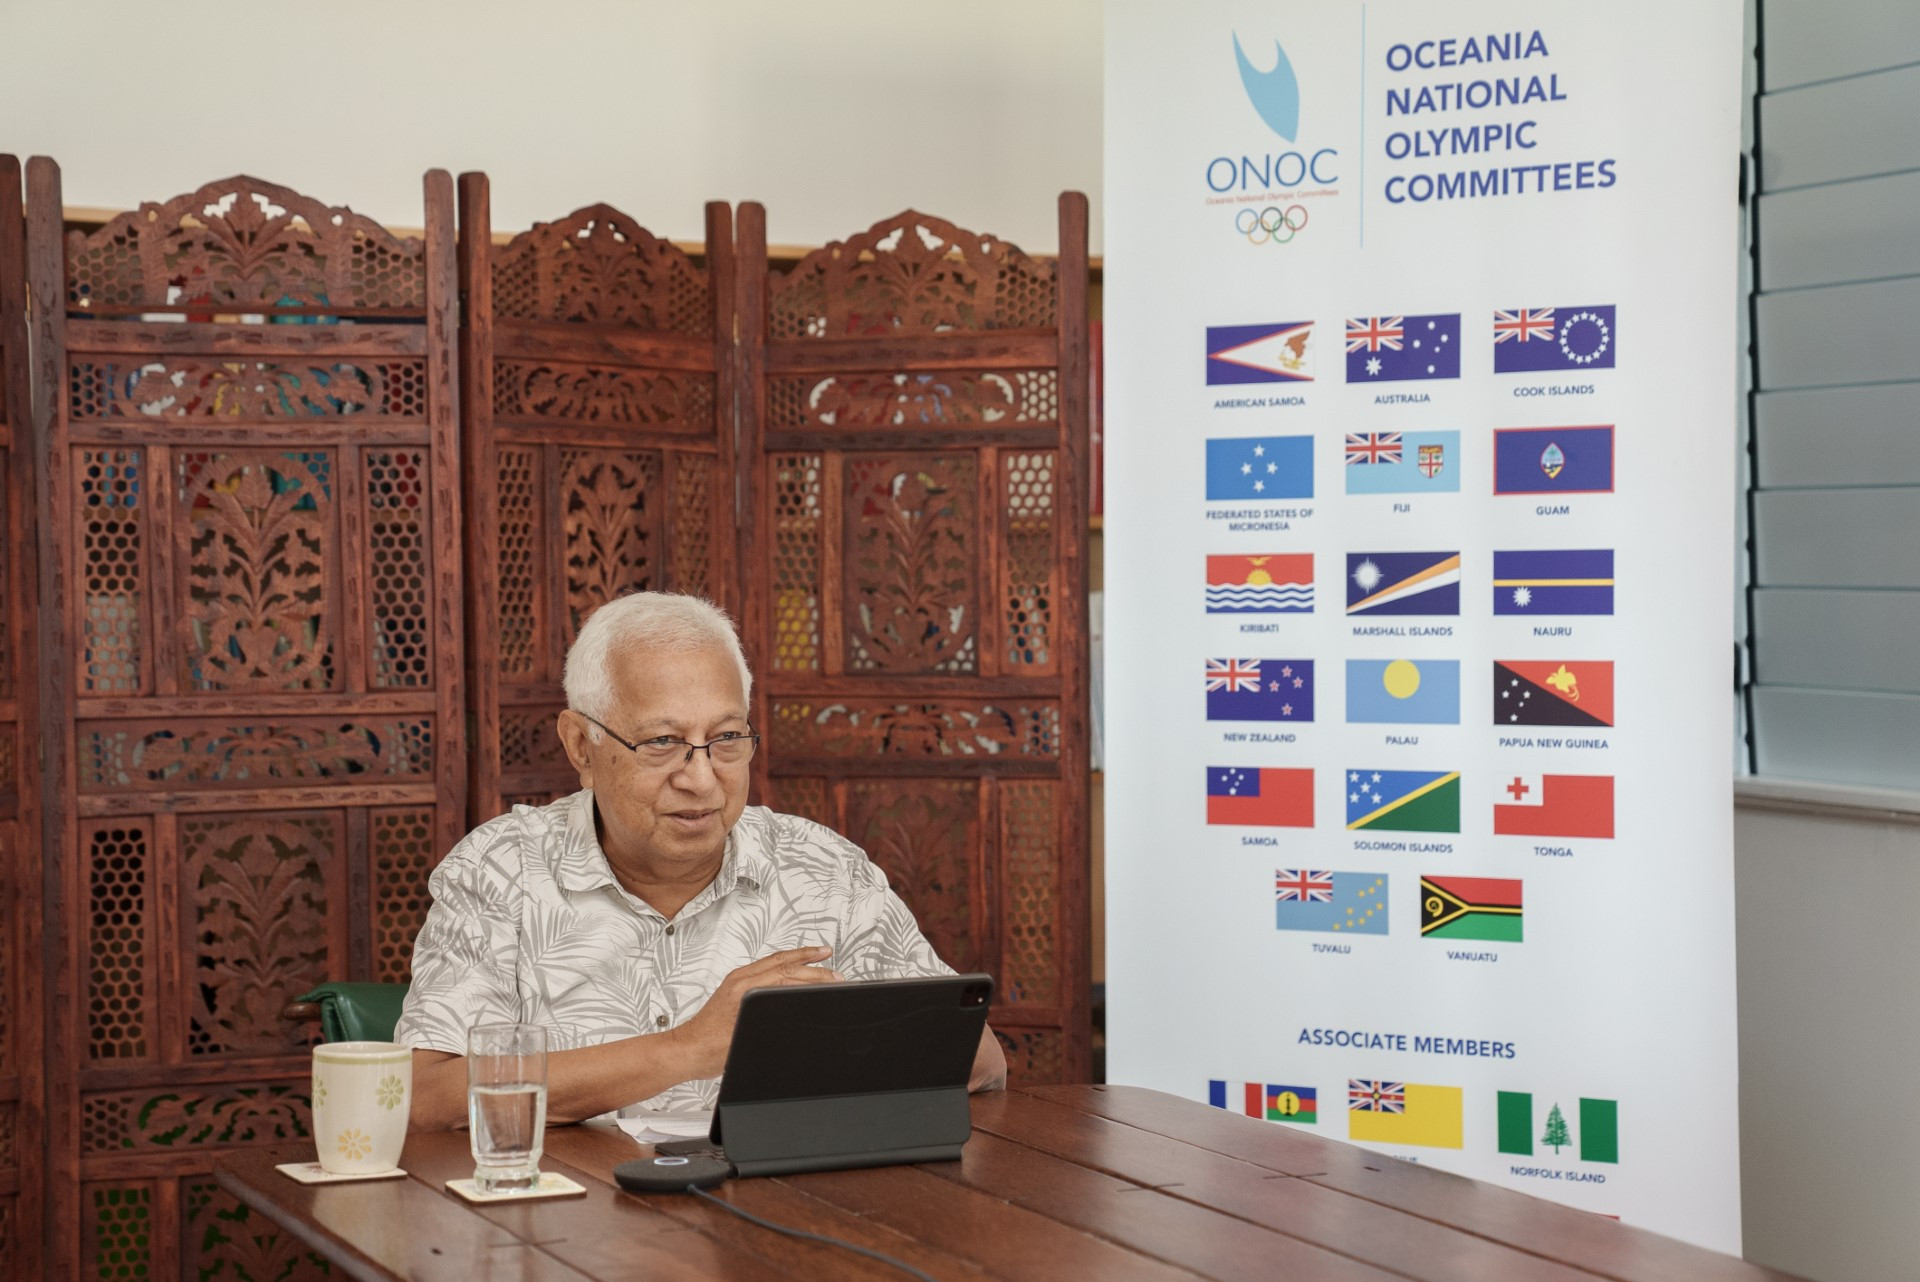 Oceania National Olympic Committee President Robin Mitchell has held talks with South East Queensland universities about working together before Brisbane 2032 ©ONOC 